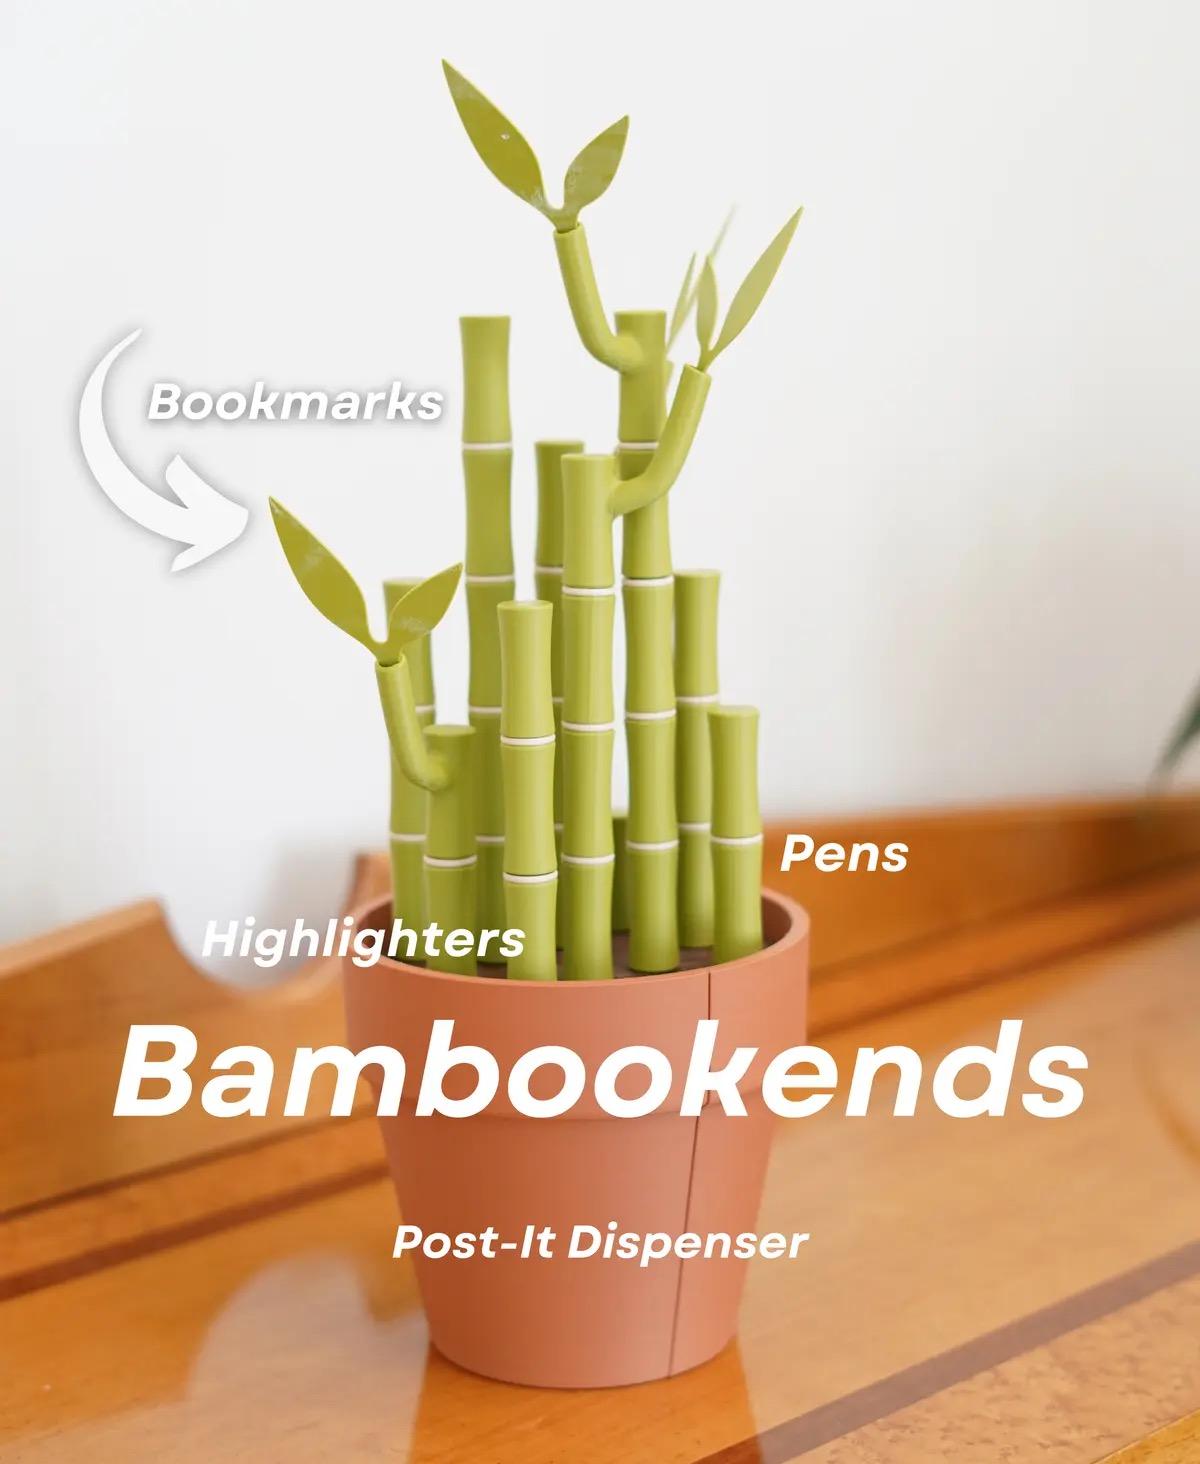 BAMBOOKENDS, 5 in 1 Functional Plant. 3d model